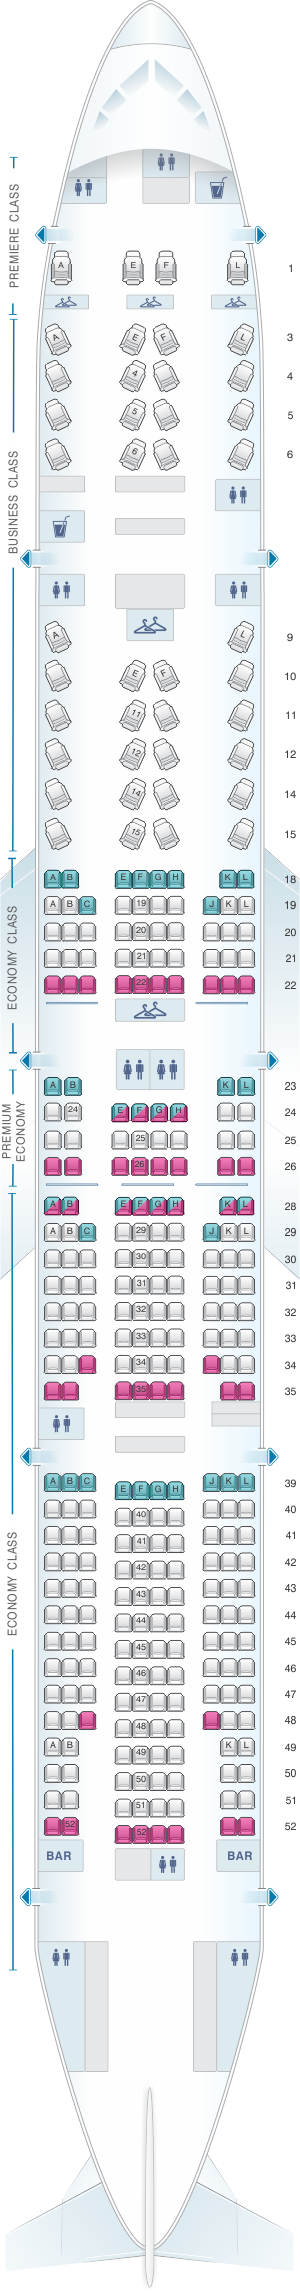 Seat map for Air France Boeing B777 300 International Long-Haul 322pax